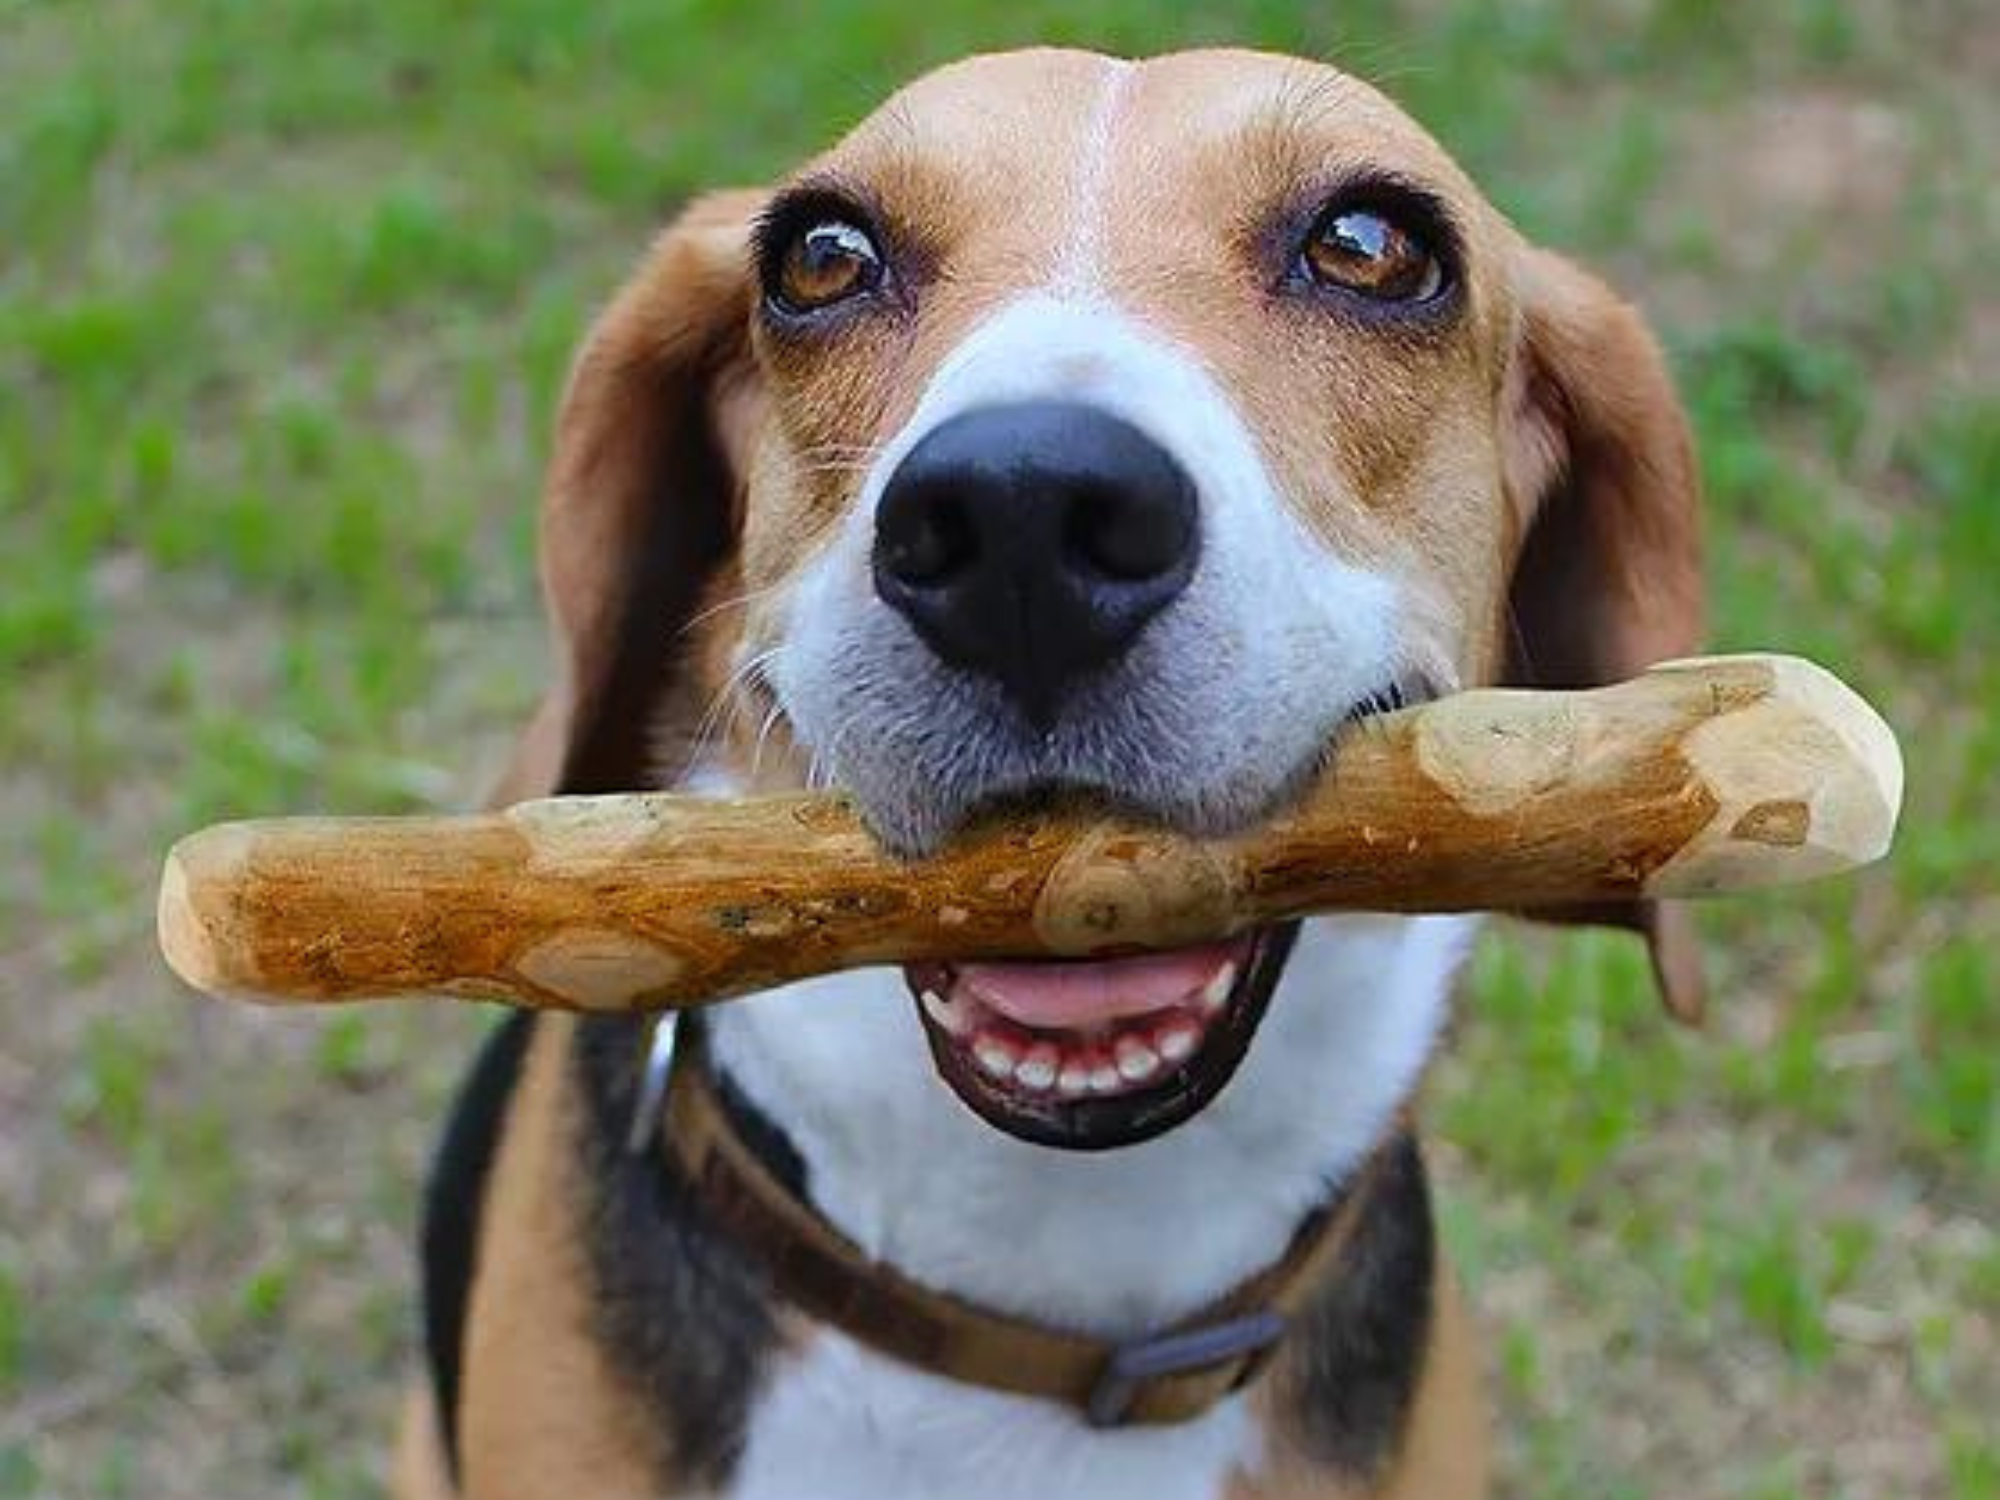 GoodWood Chewable Stick For Dogs